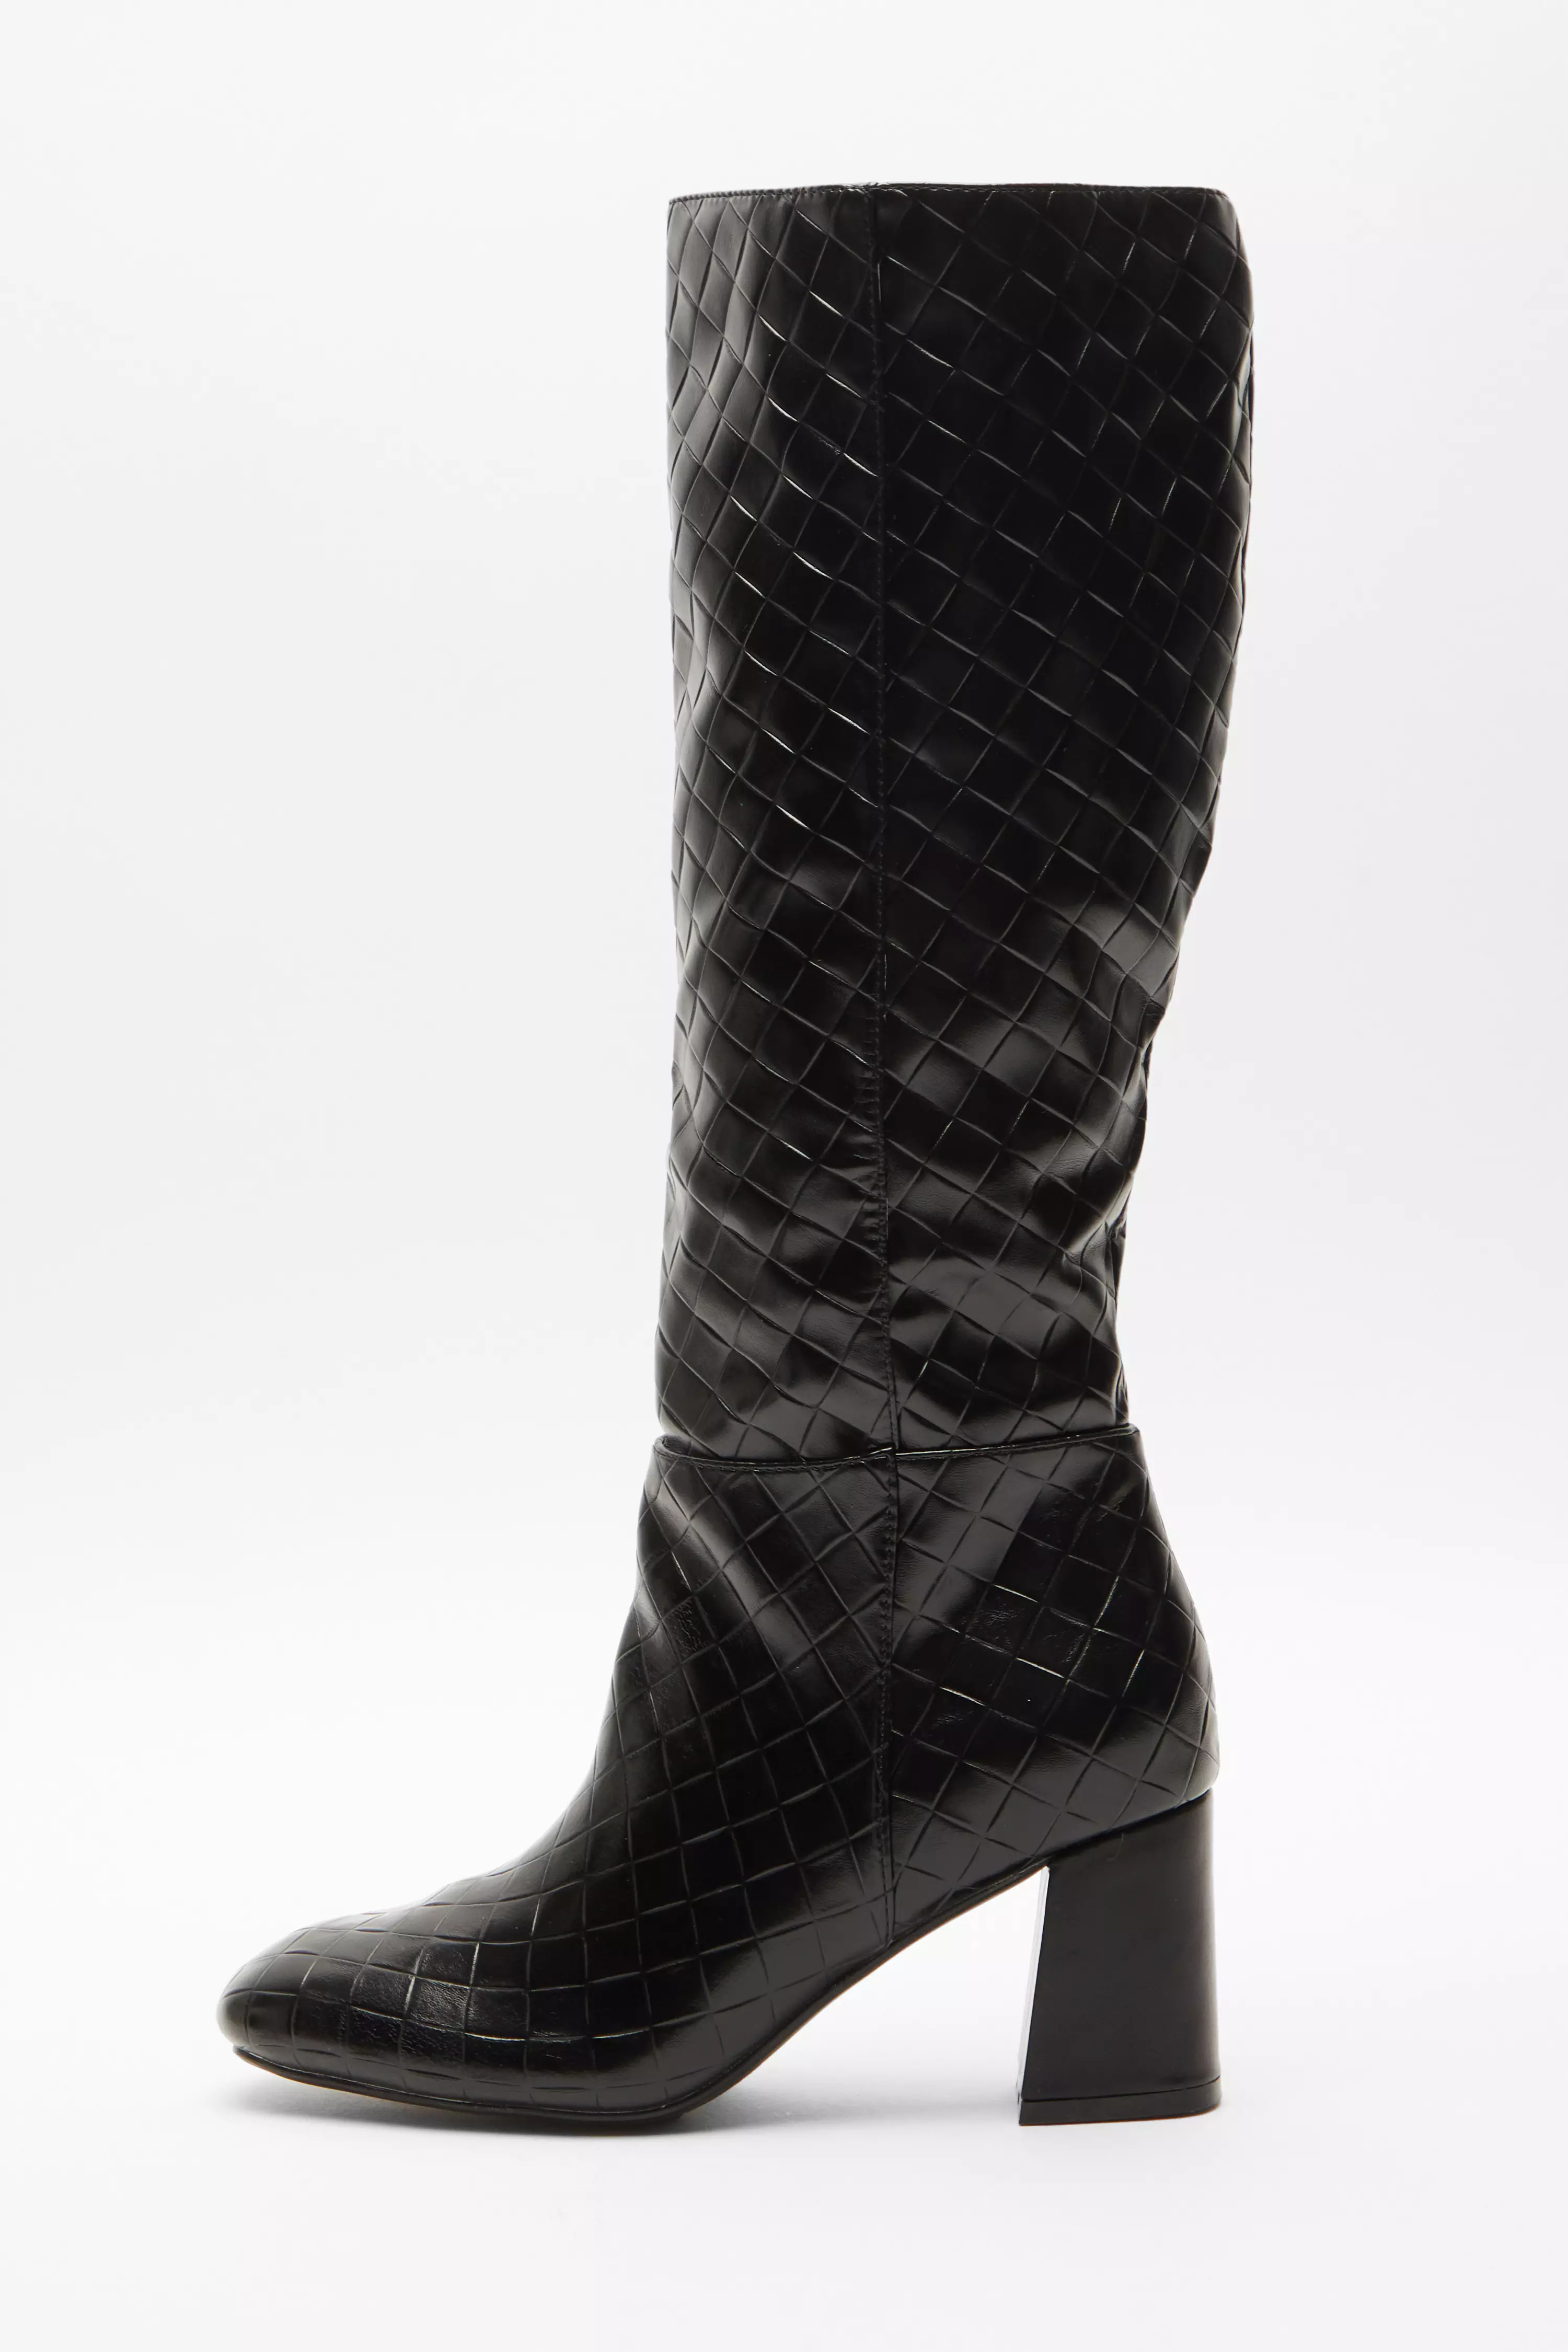 Black Faux Leather Textured Knee High Boots